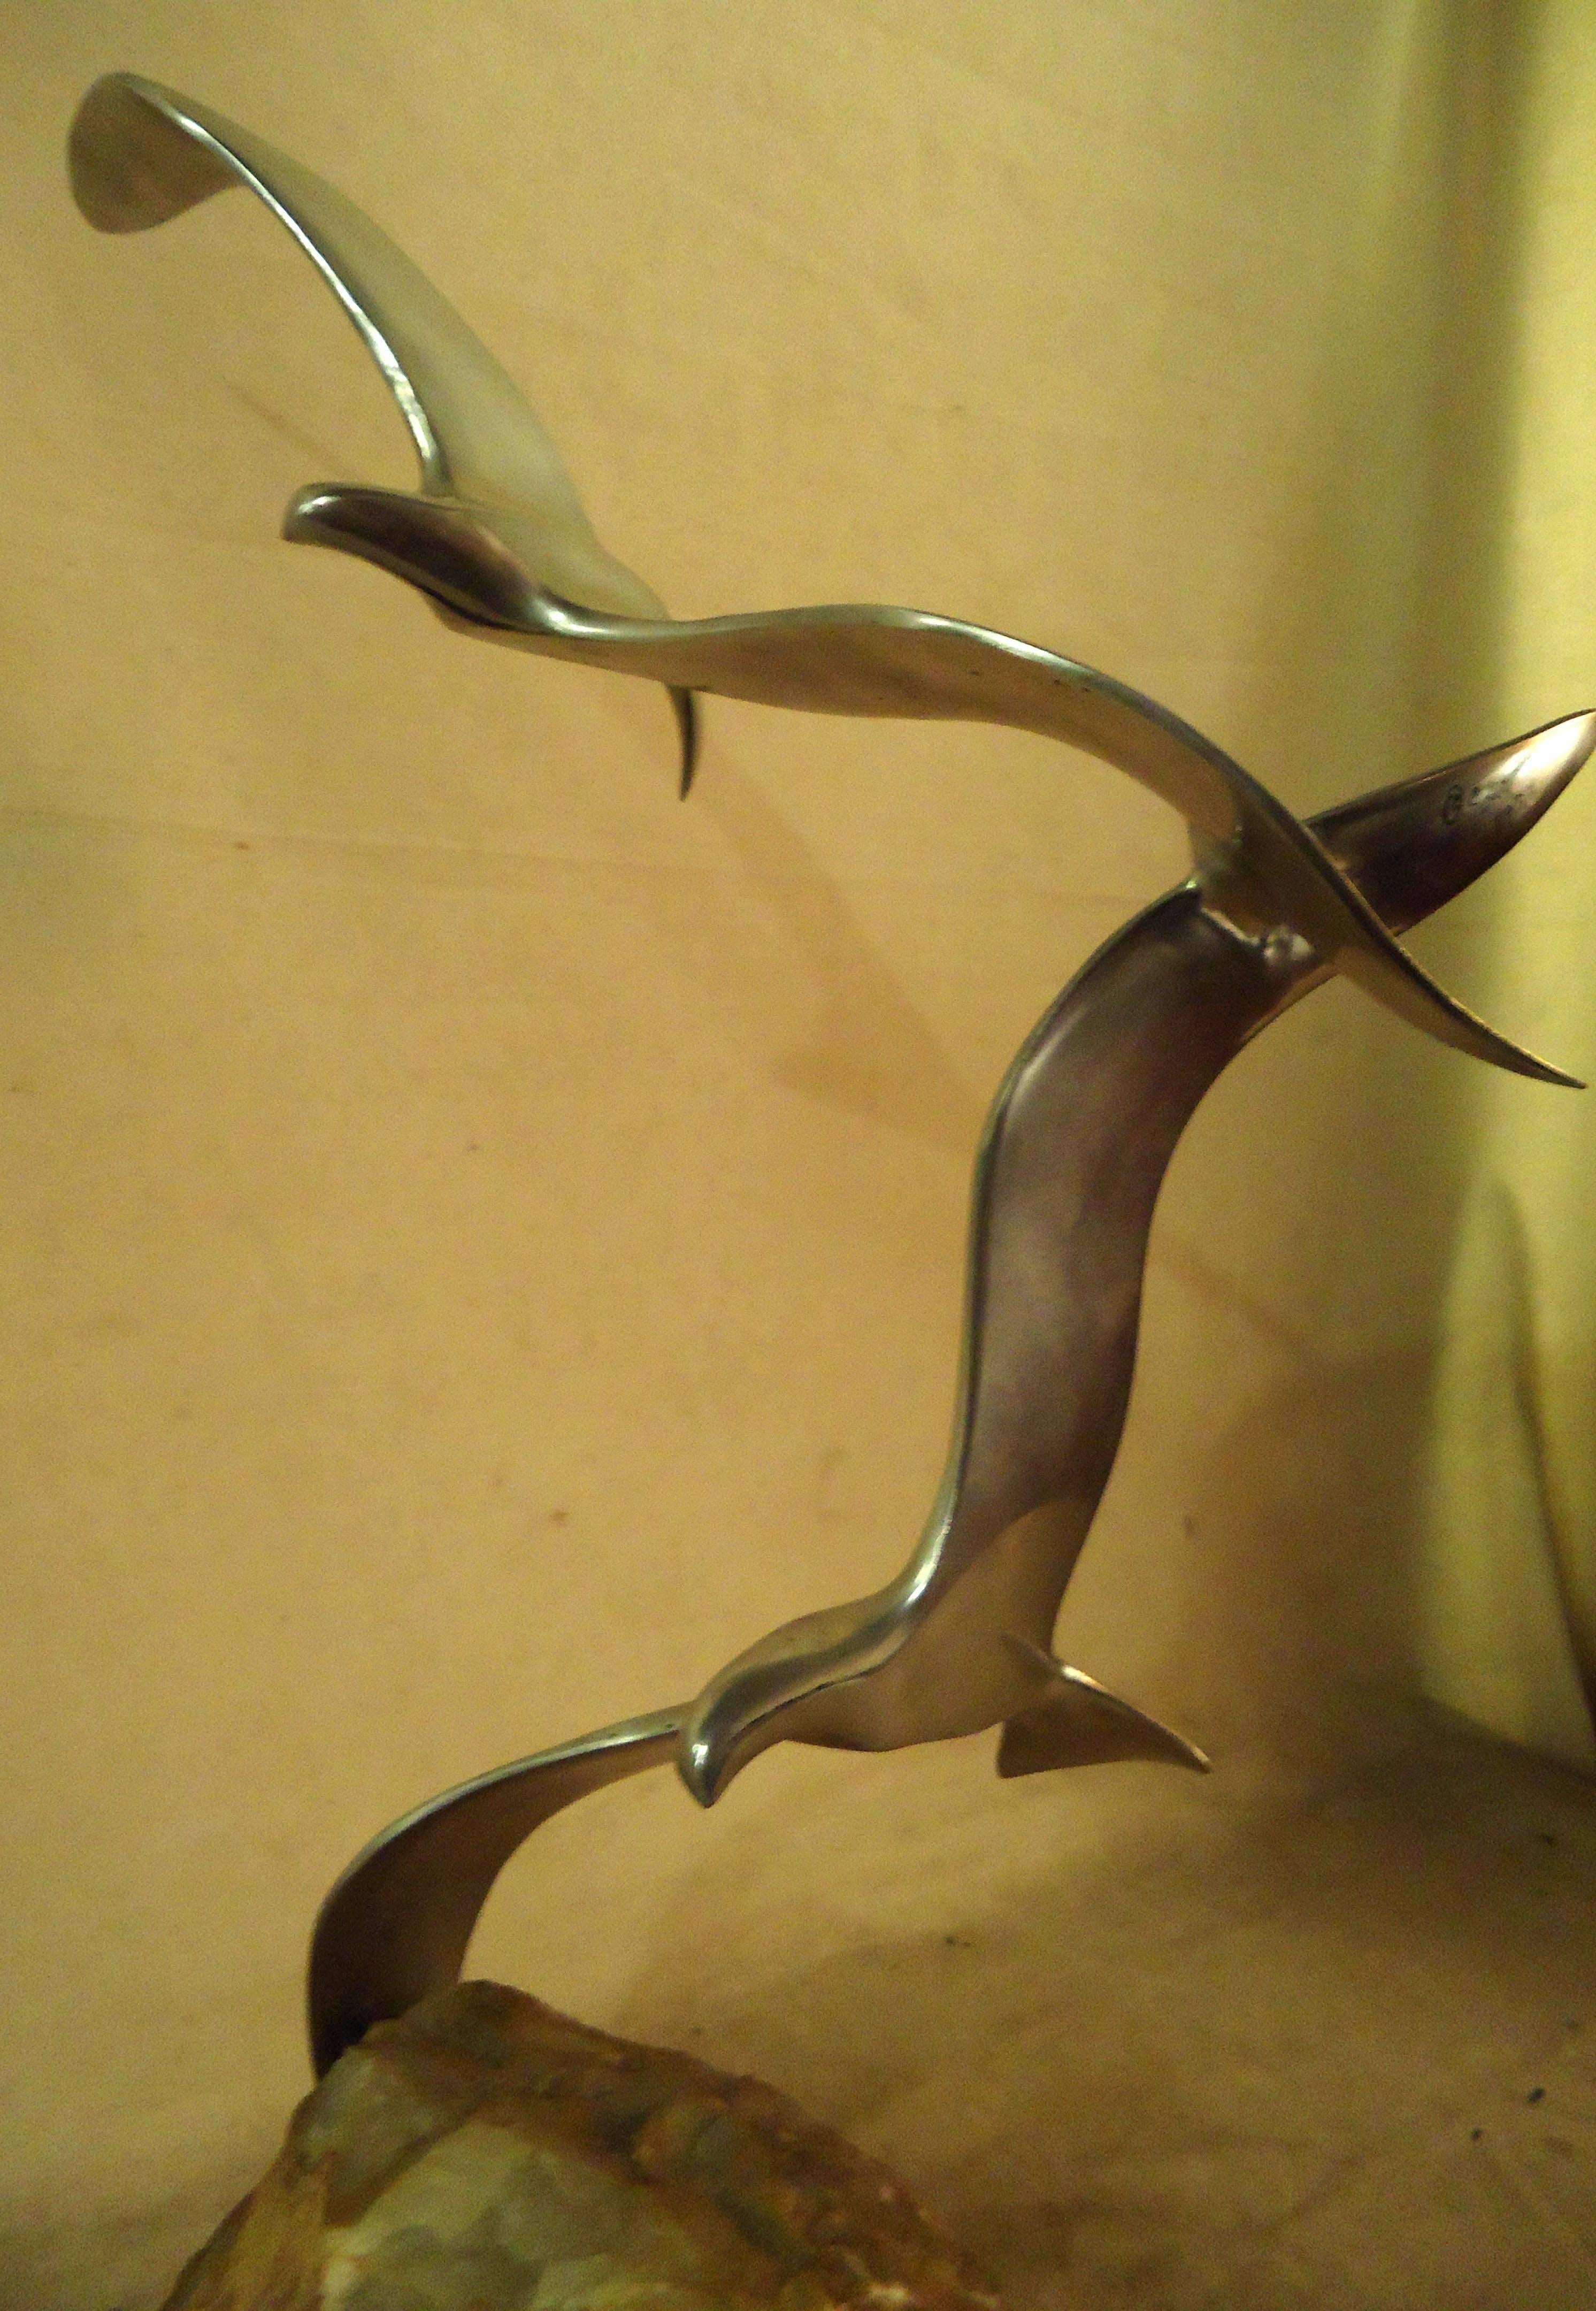 Late 20th Century Midcentury Curtis Jere Sculpture Signed and Dated